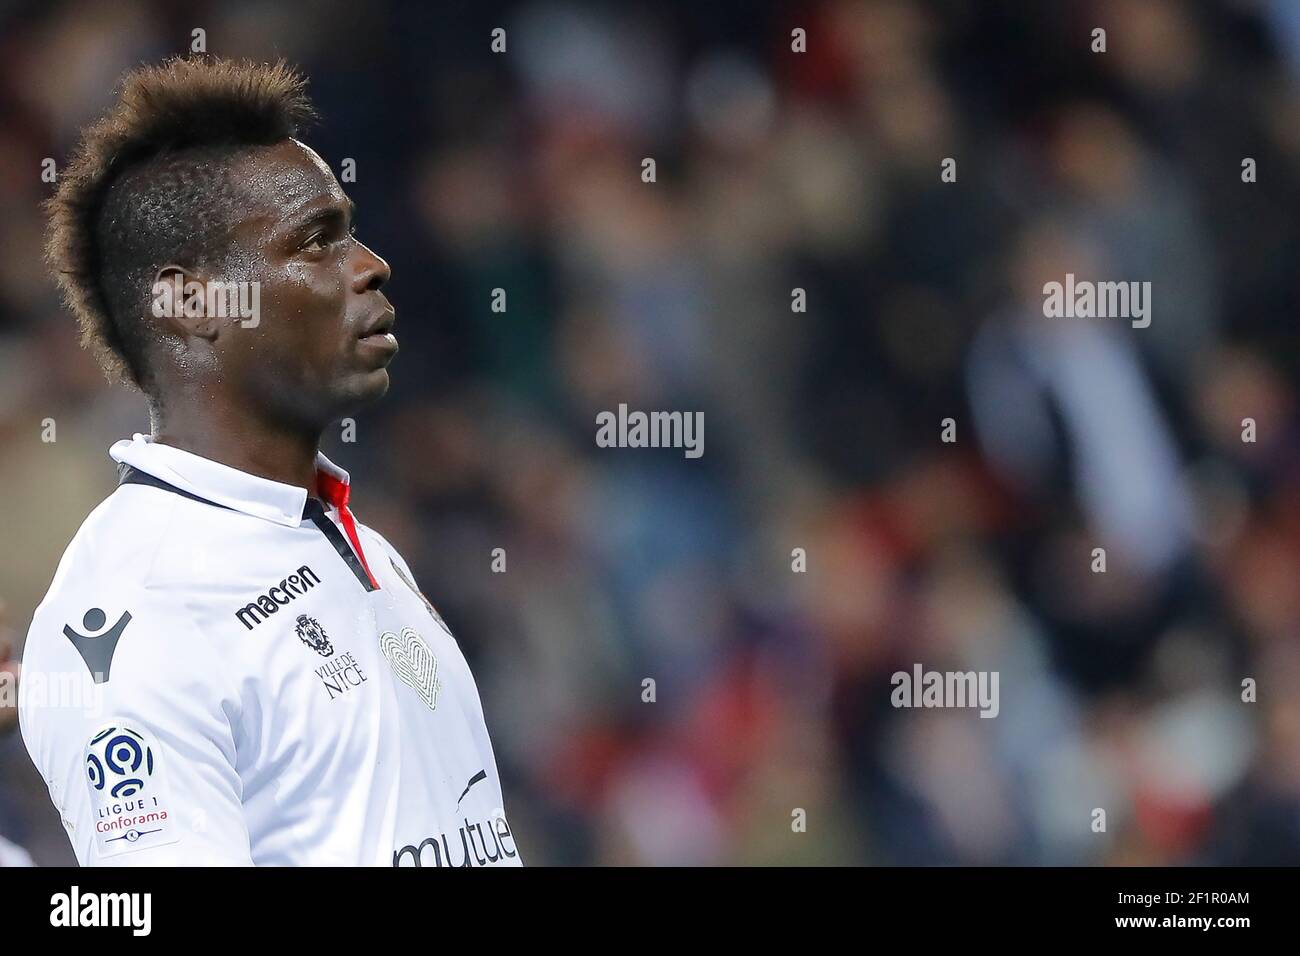 Mario Balotelli (Olympique Gymnaste Club Nice Cote d Azur - OGC Nice)  during the French Championship Ligue 1 football match between Paris  Saint-Germain and OGC Nice on October 27, 2017 at Parc